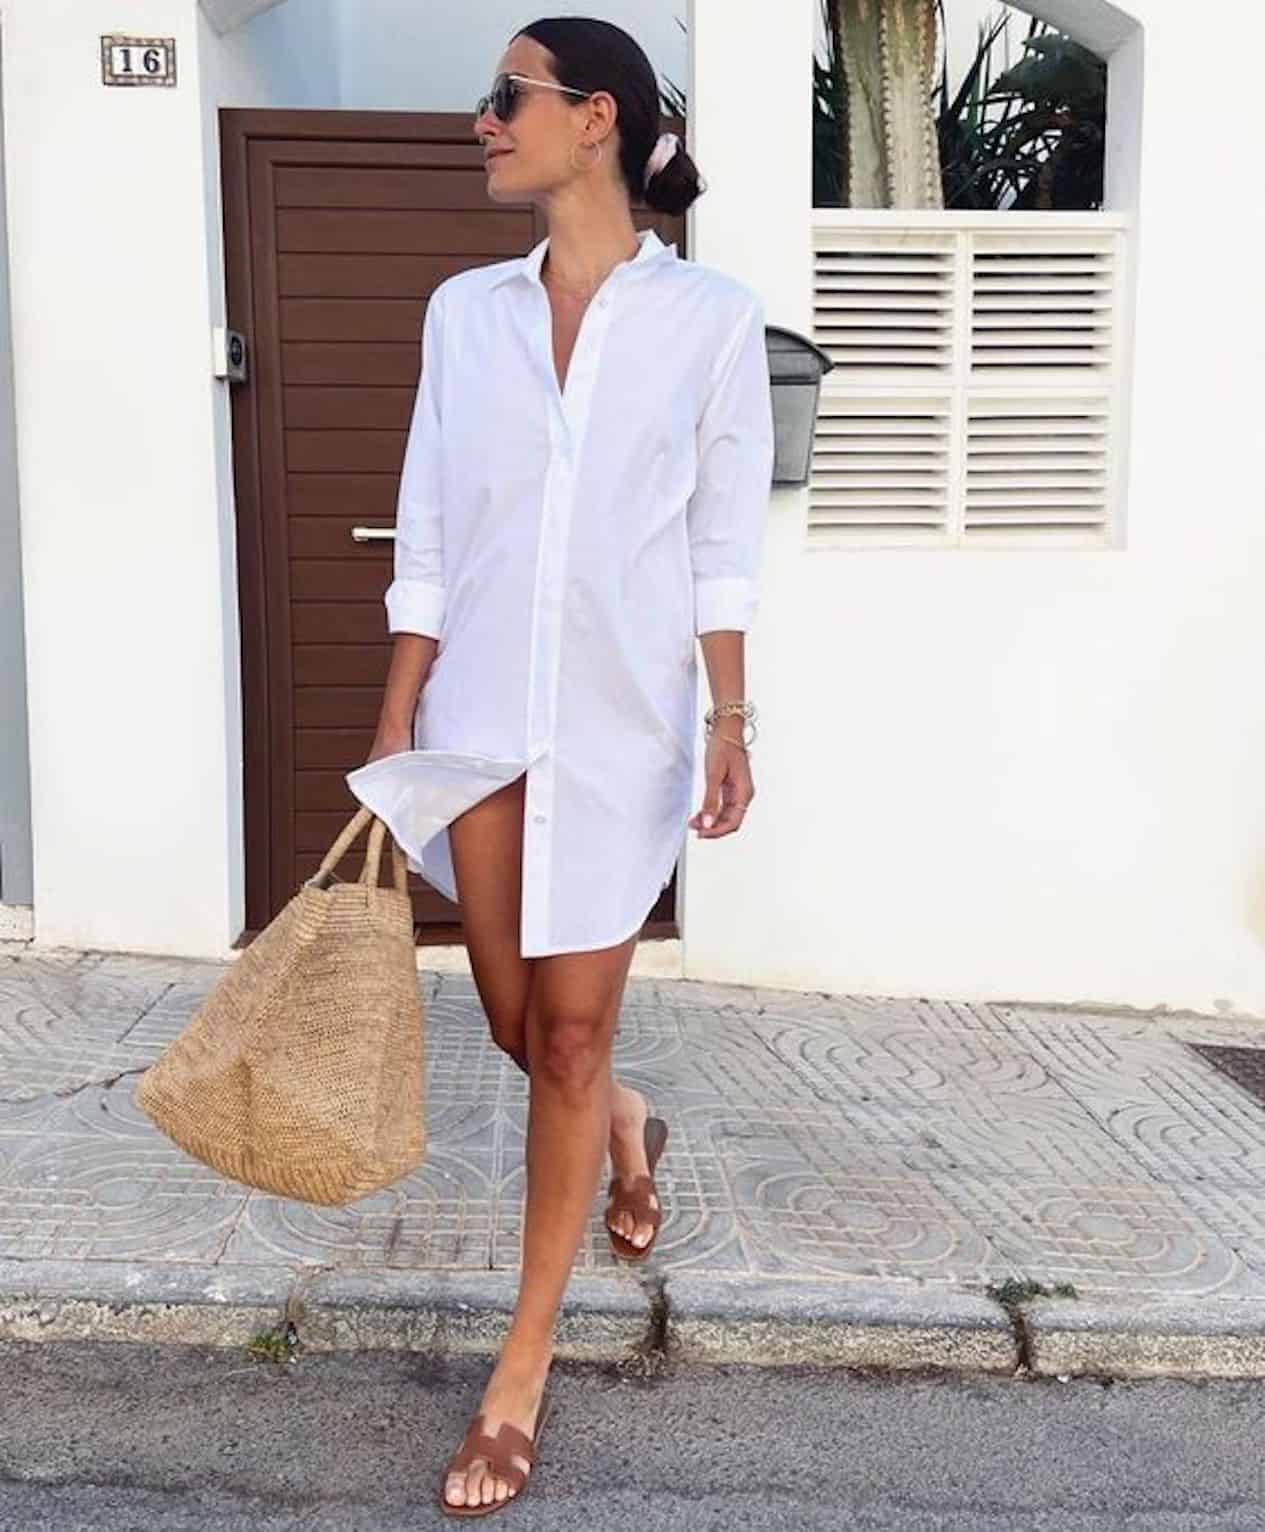 image of a woman crossing the street wearing a white button up shirt dress and brown sandals